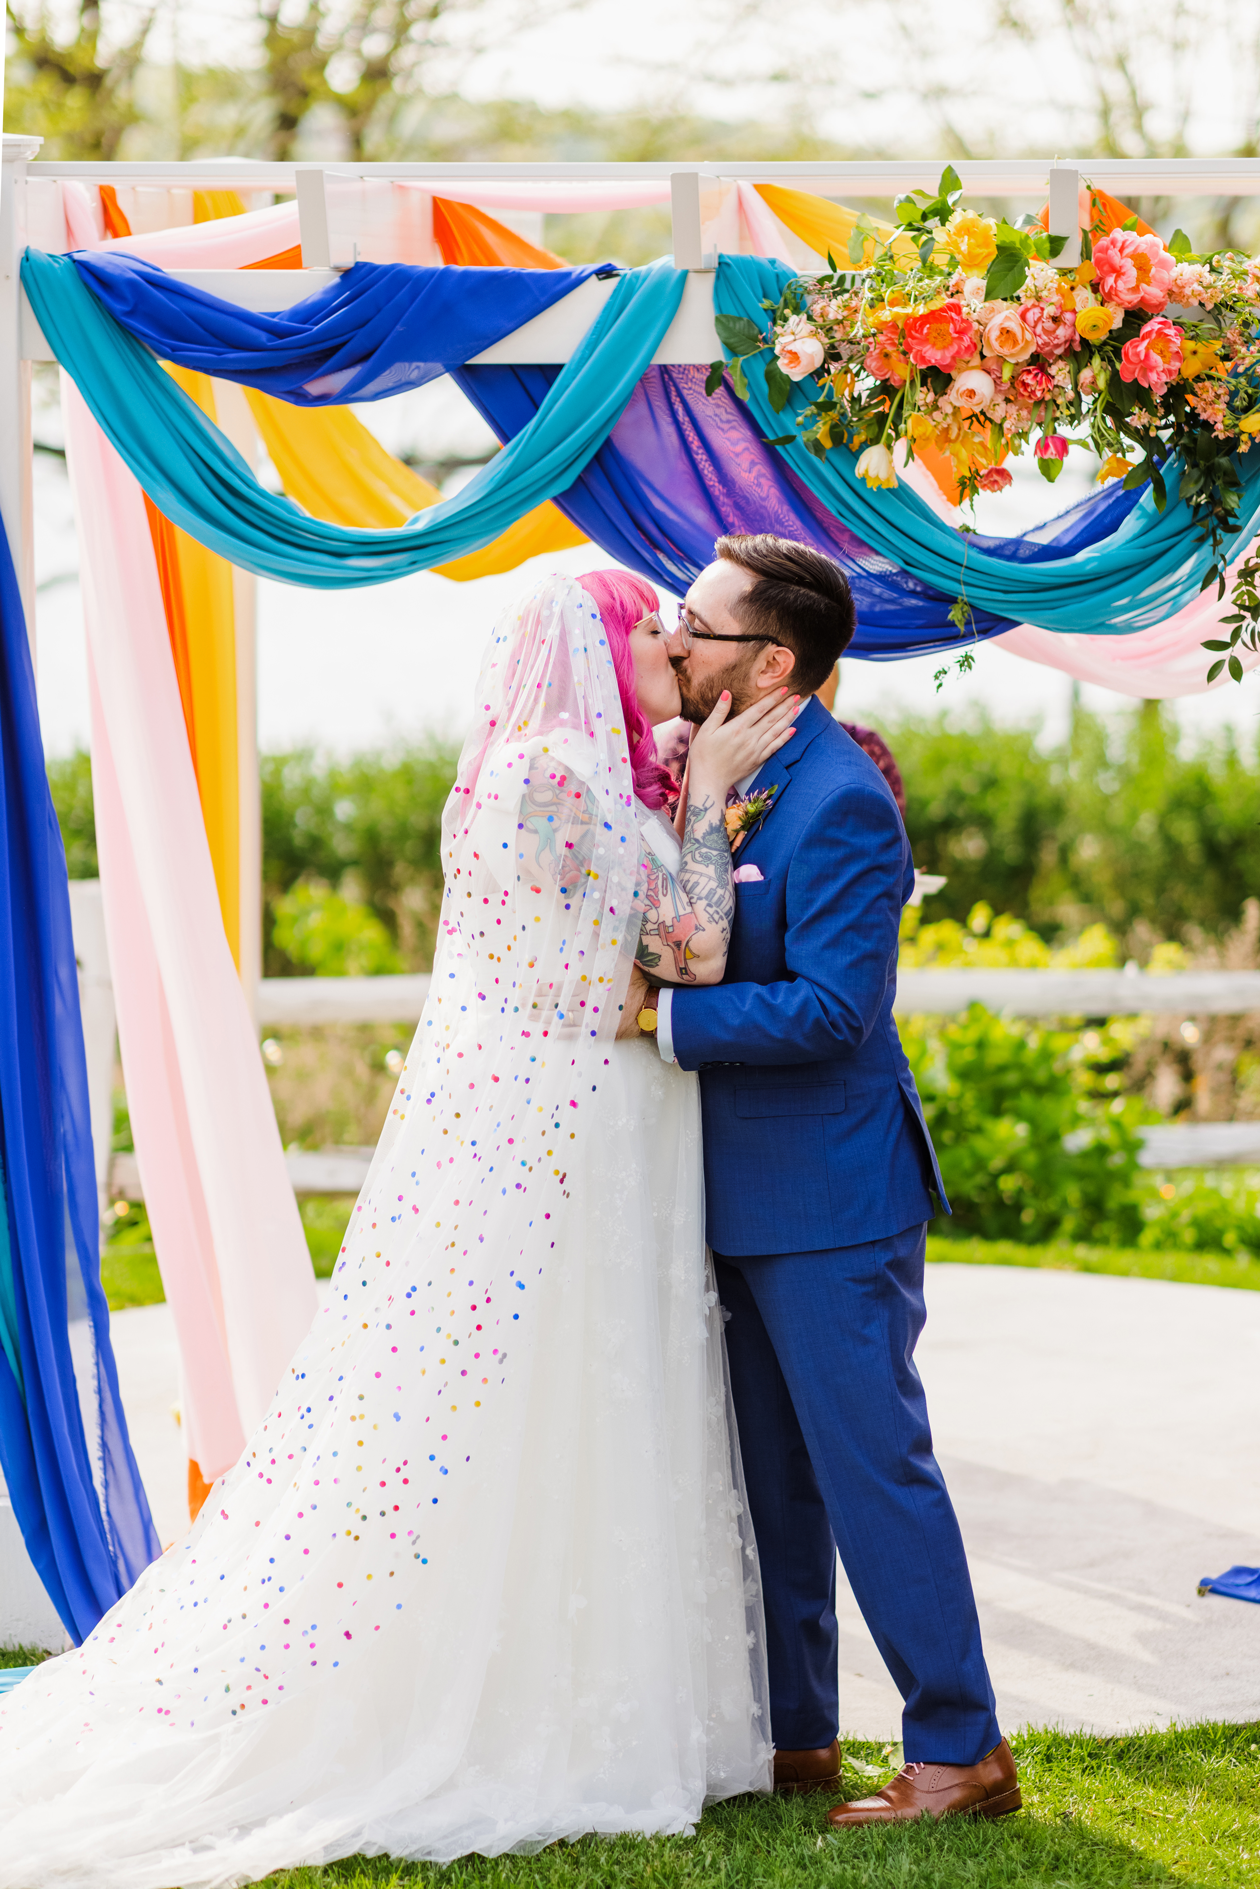 The Crafted Life's Colorful DIY Wedding